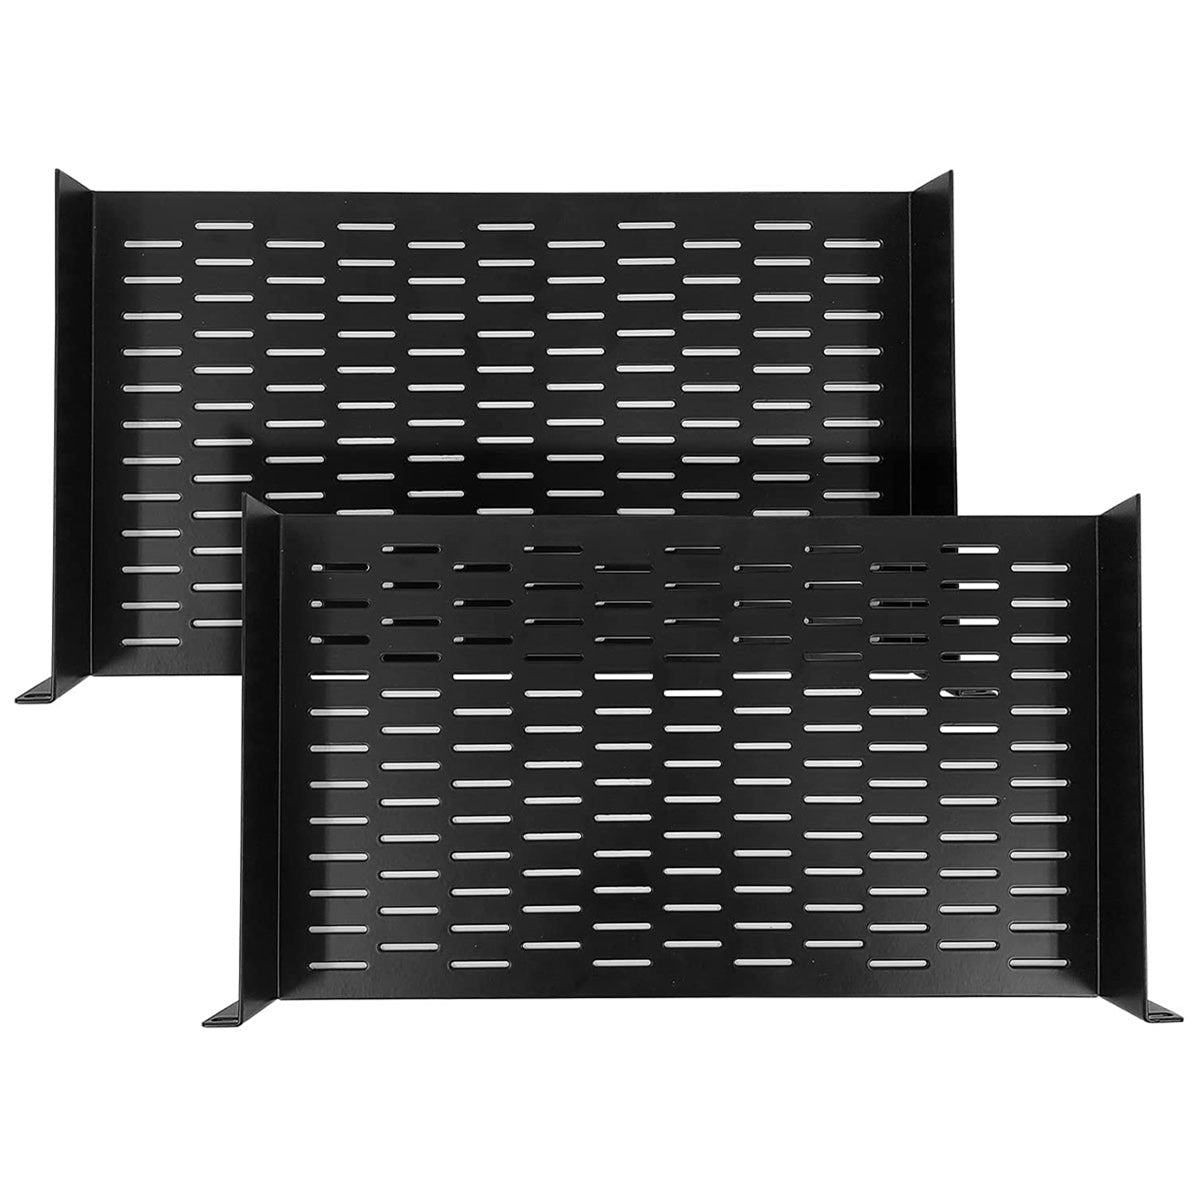 AxcessAbles 1U Vented AV Cantilever Rack Shelf for 19 Inch Equipment Rack & IT Cabinets. 10 Inches Deep No Lips. 44lb Capacity (2 Pack) - Open Box